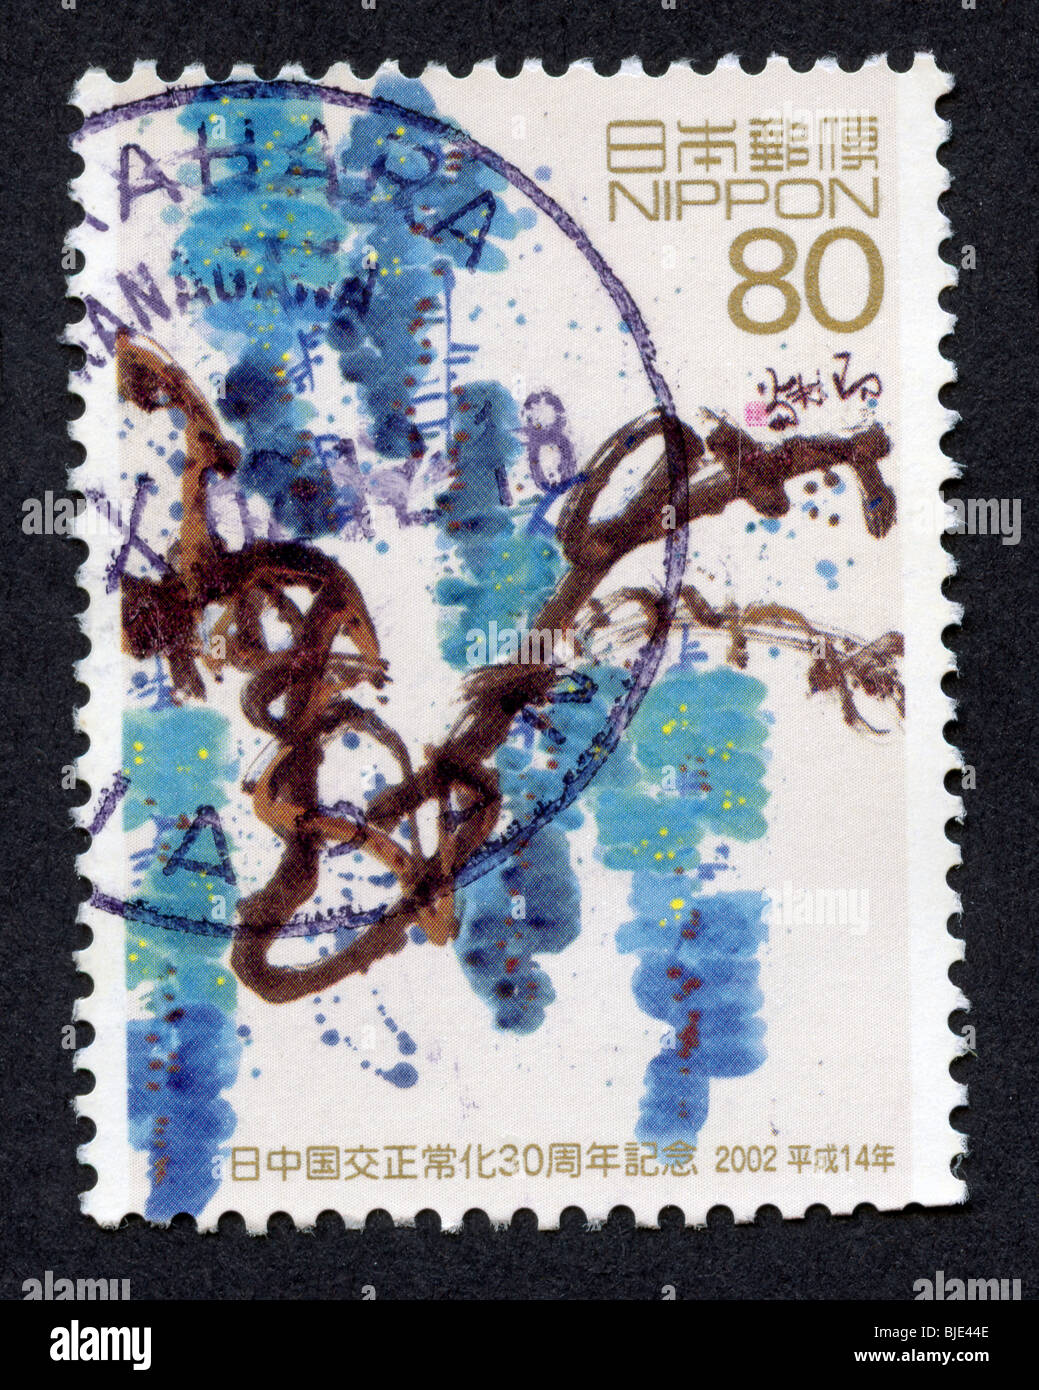 List of people on the postage stamps of Japan - Wikipedia